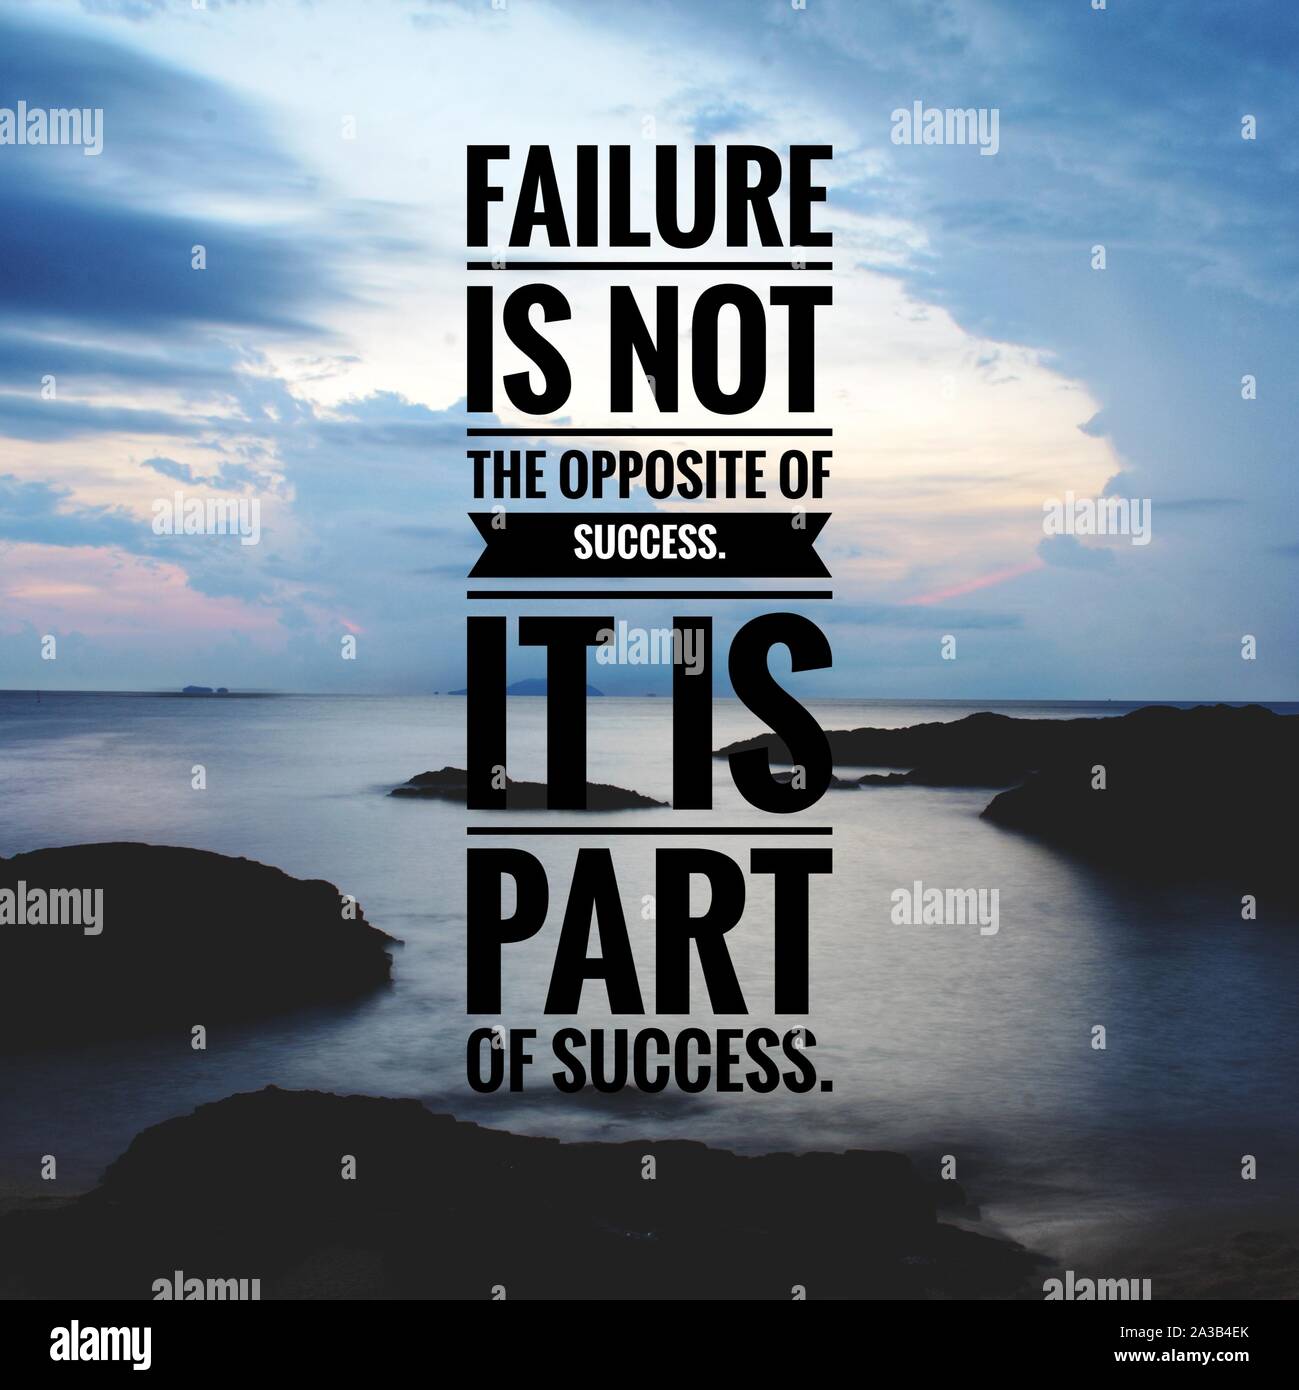 Motivational and inspirational quote - Failure is not the opposite of success. It is part of success. Stock Photo